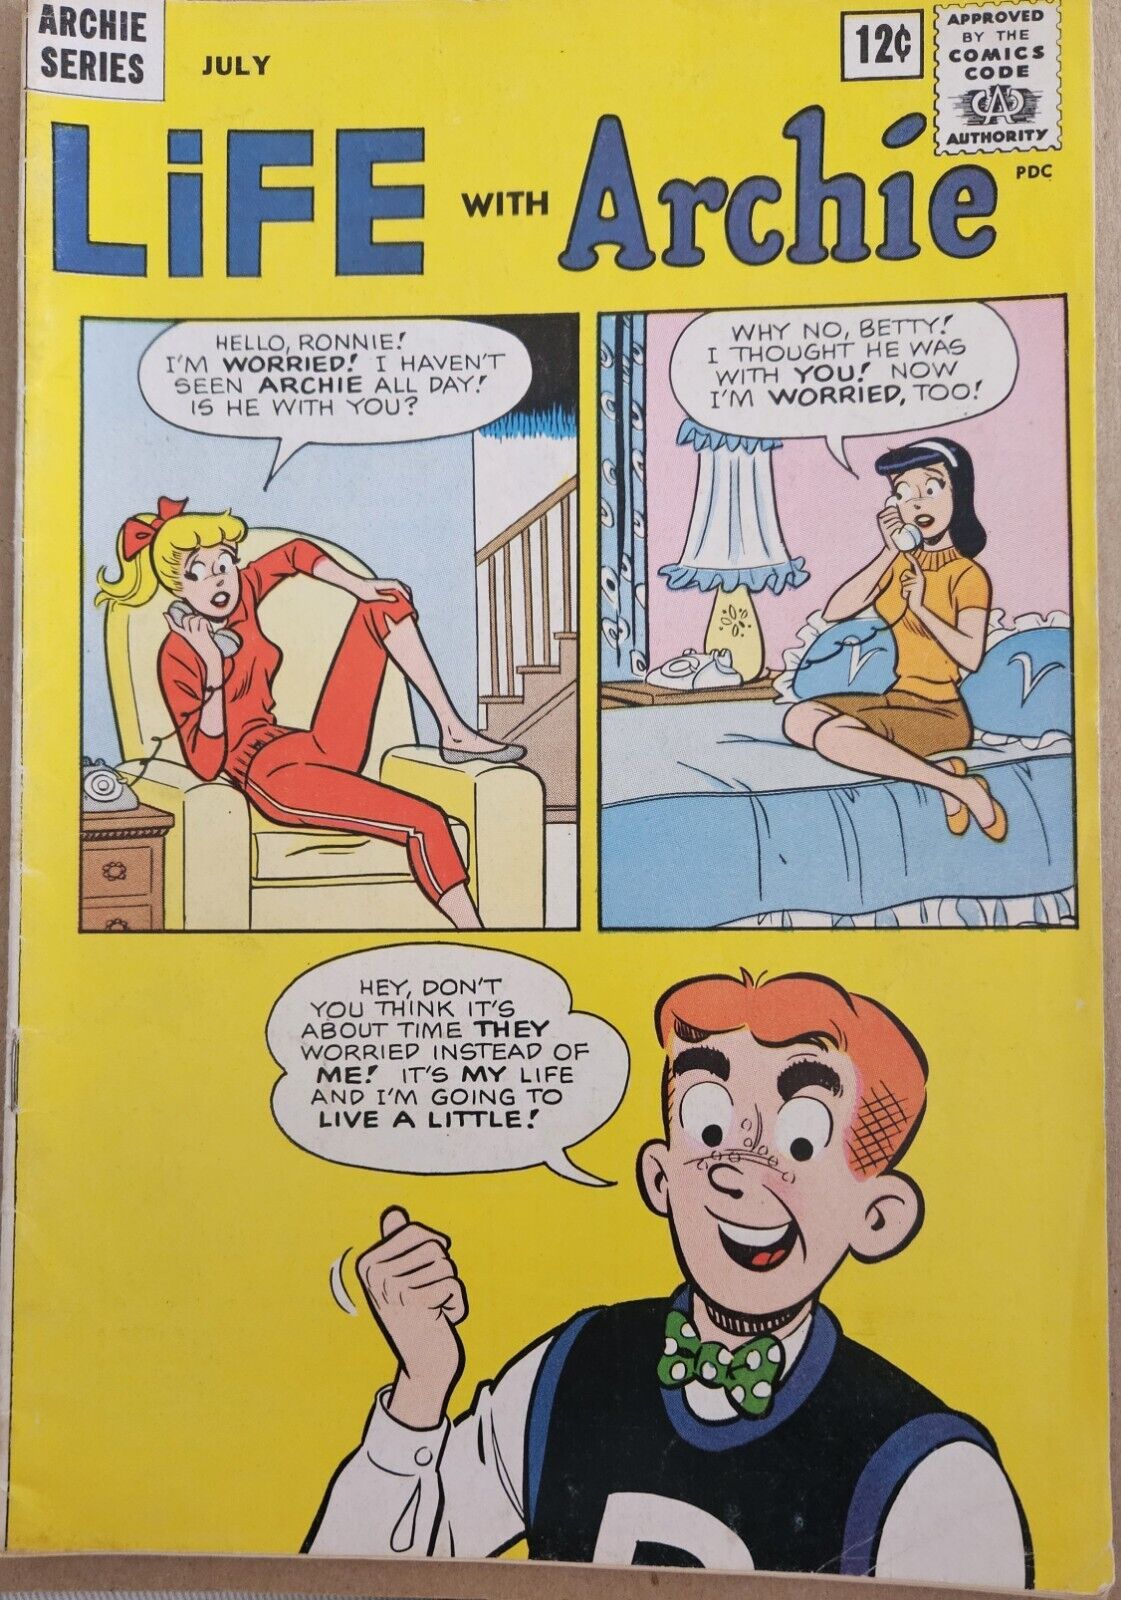 1963 Life with Archie No 24 Comic Book